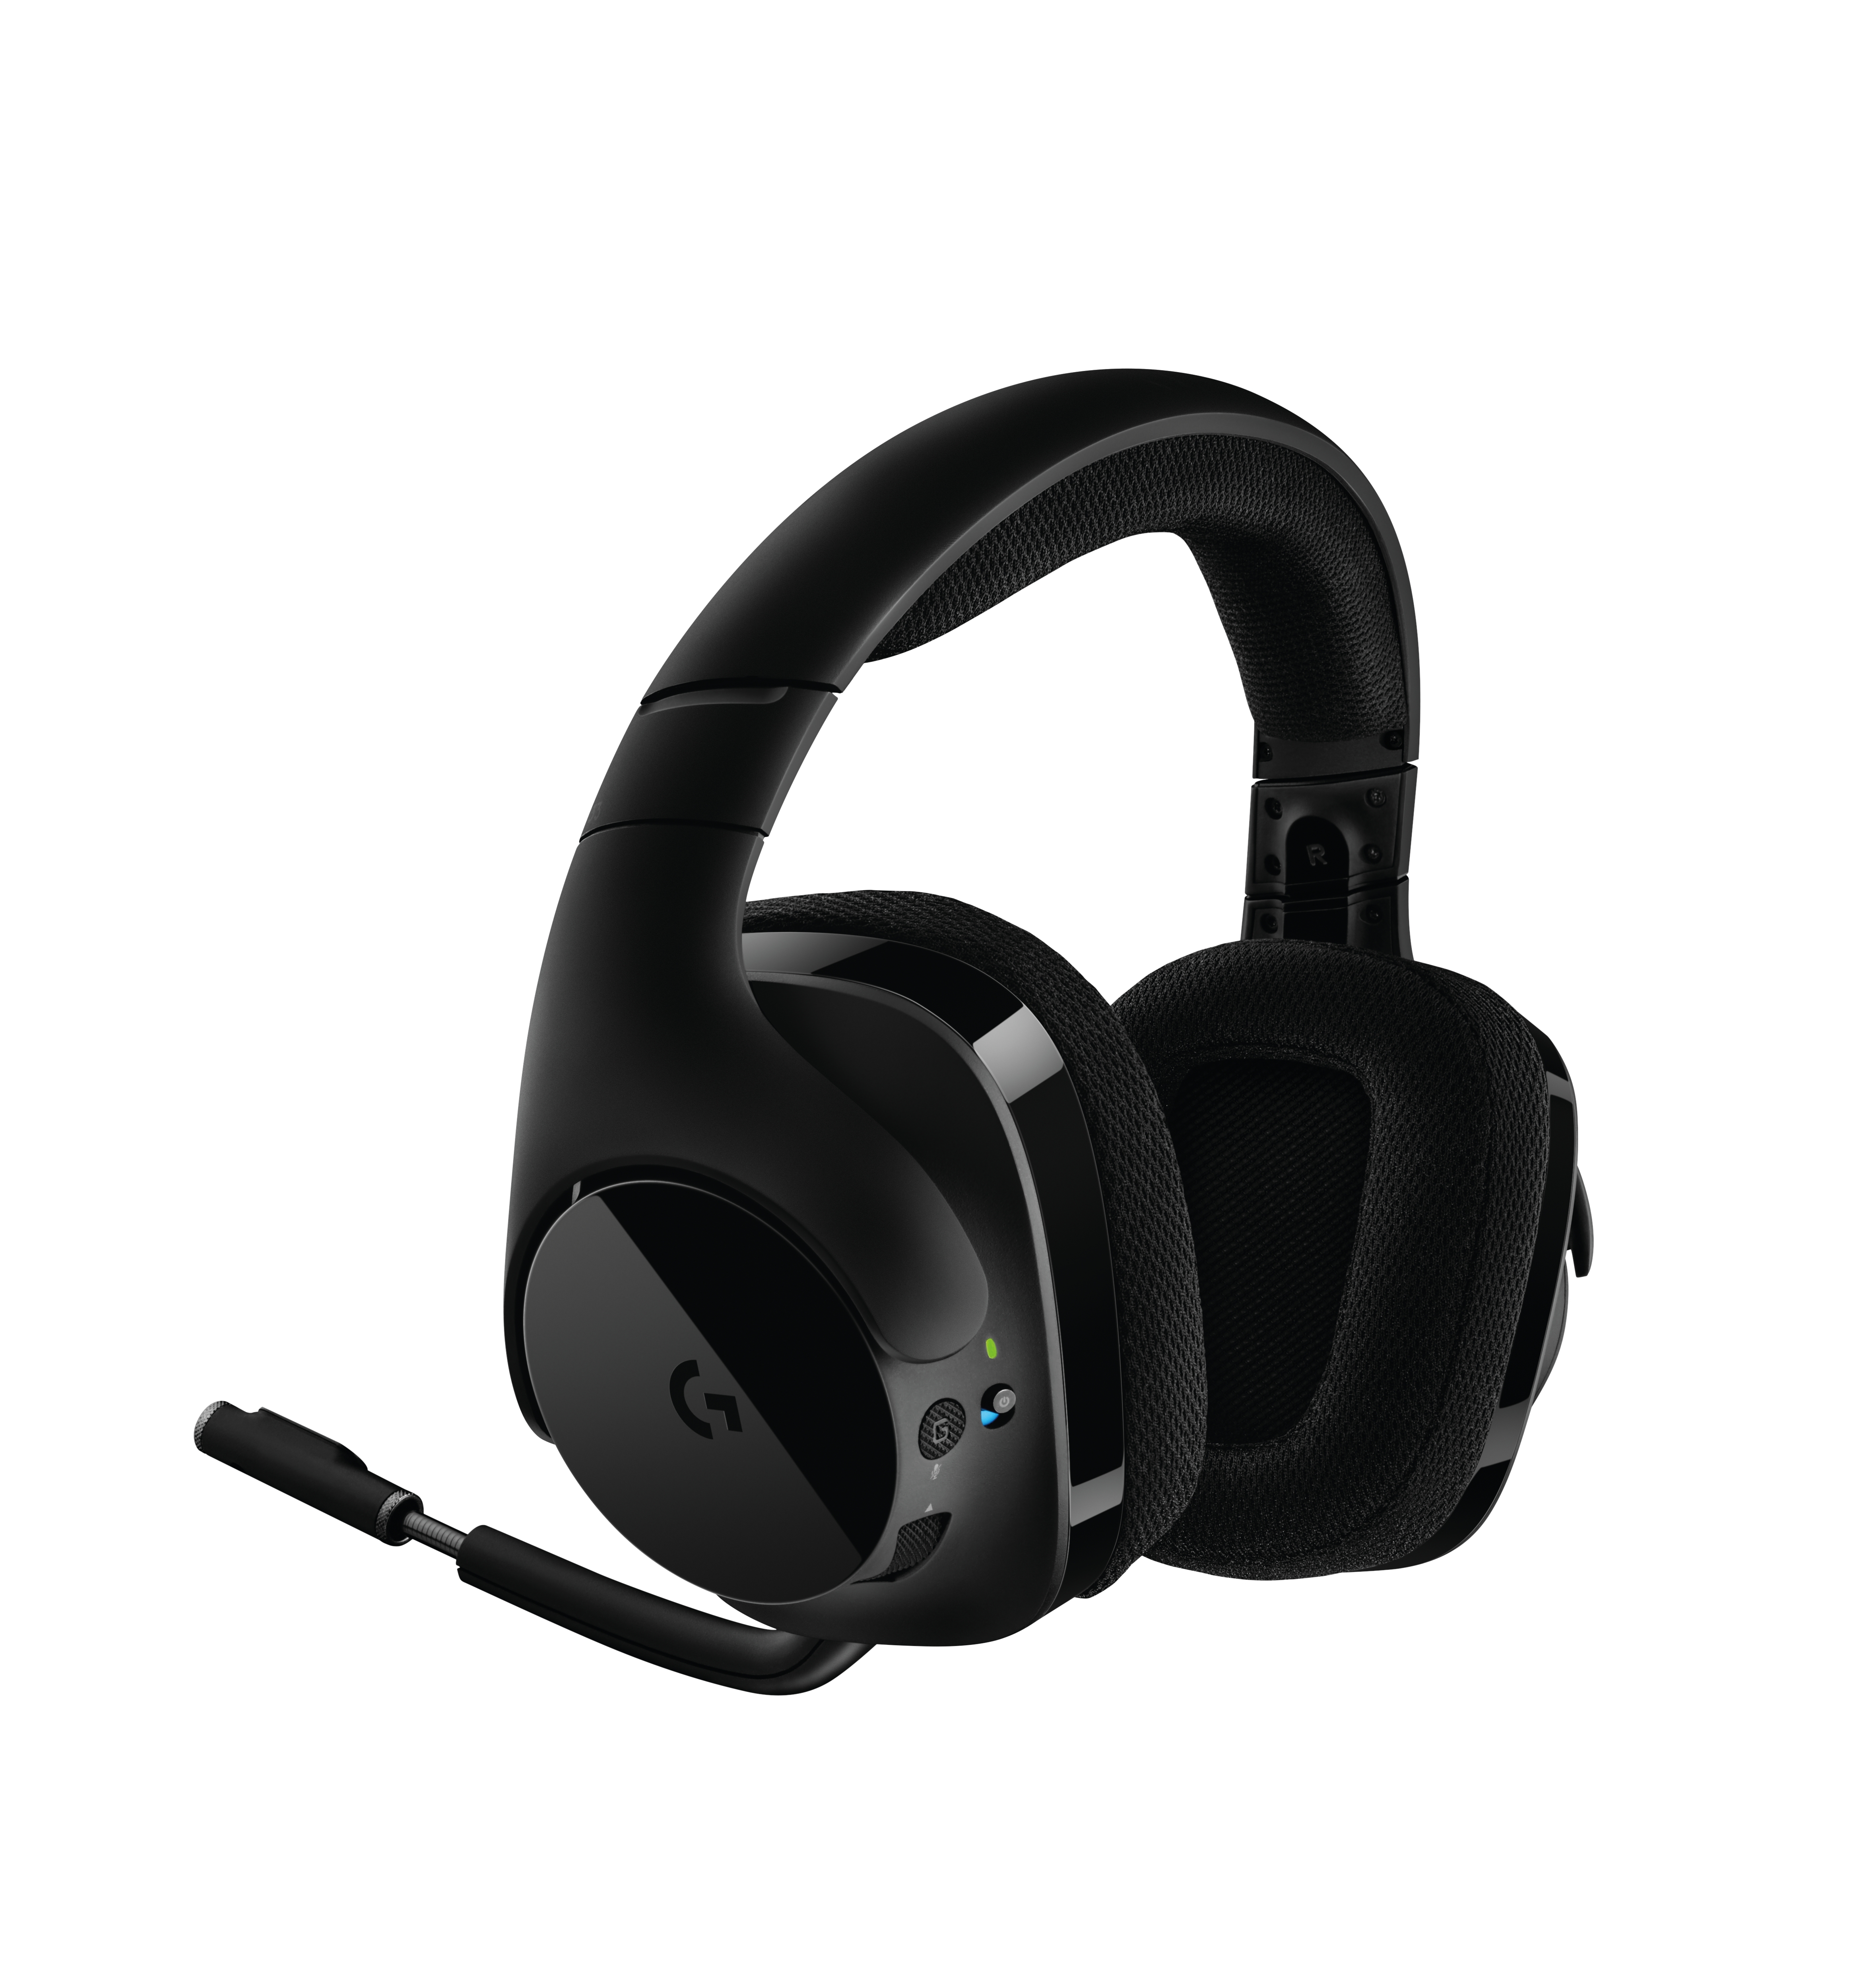 G Unleashes Advanced Audio Performance With New Wireless Gaming Headset | Business Wire